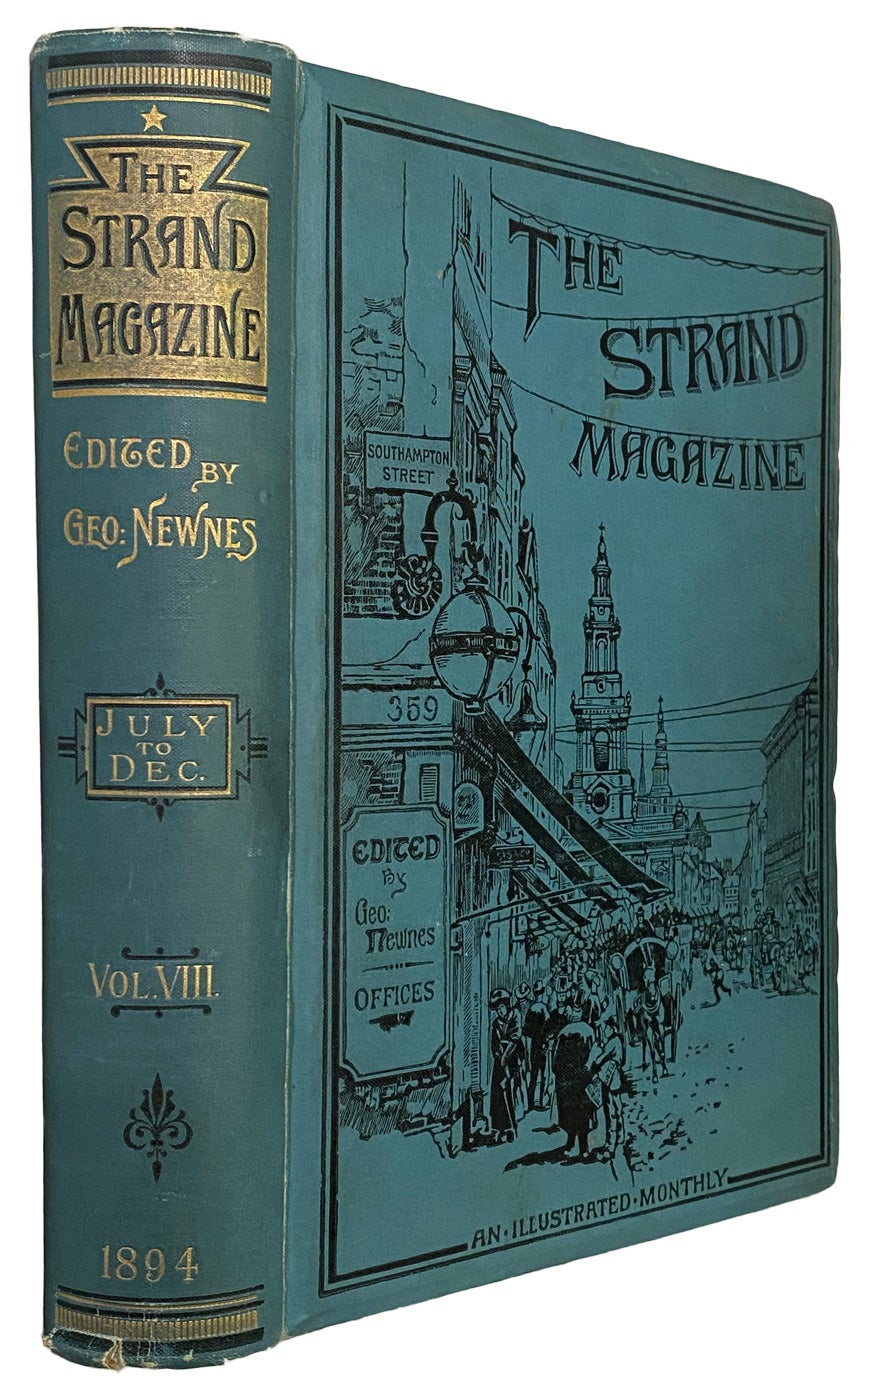 The Strand Magazine. An Illustrated Monthly. Vol. VIII. July to December.  1894 by A. CONAN DOYLE, George Newnes on Patrick McGahern Books - 